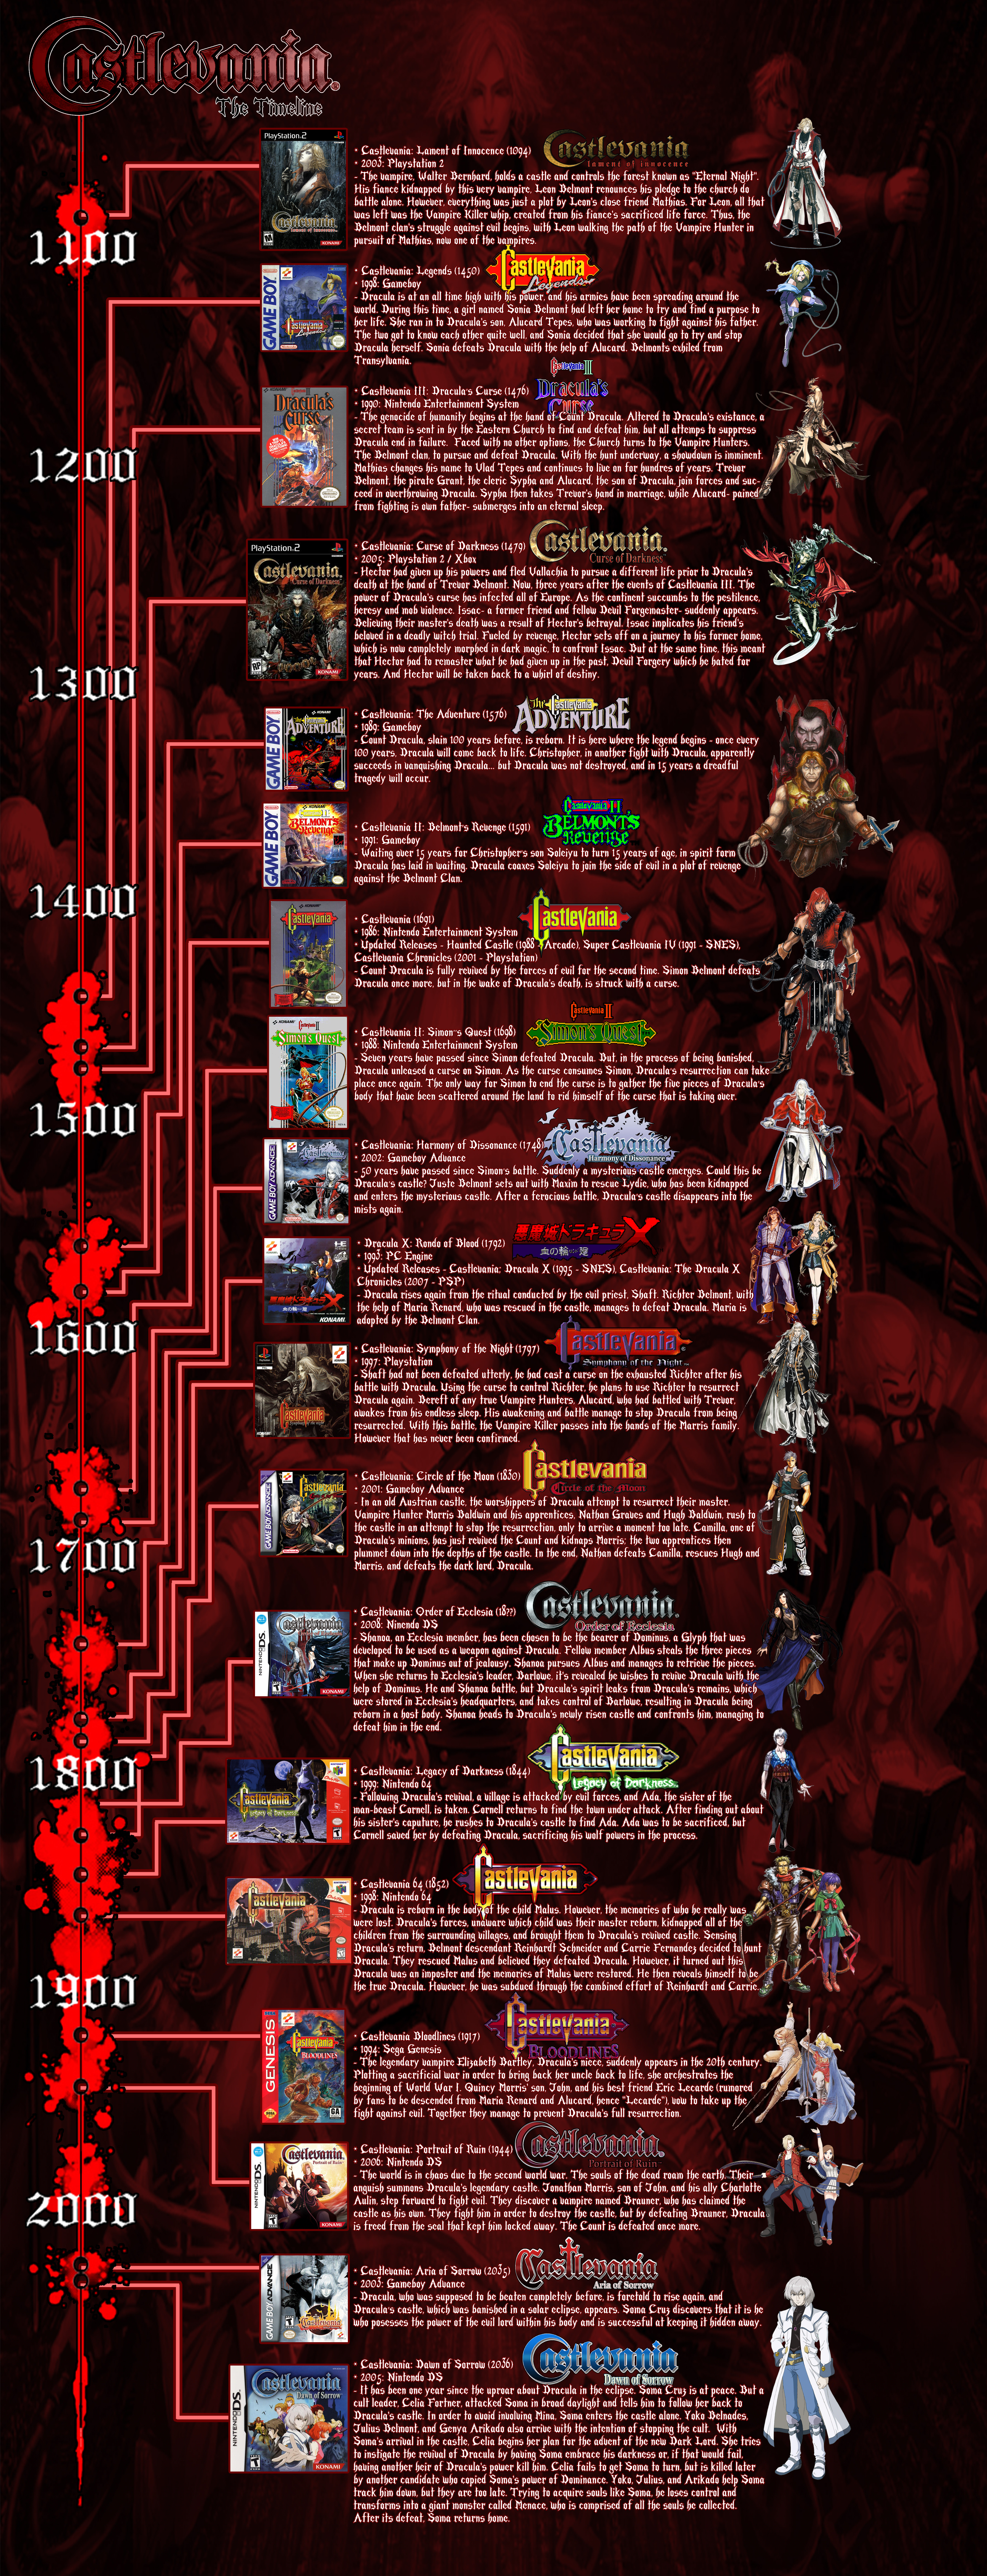 Lords of Shadow Timeline, Castlevania Wiki